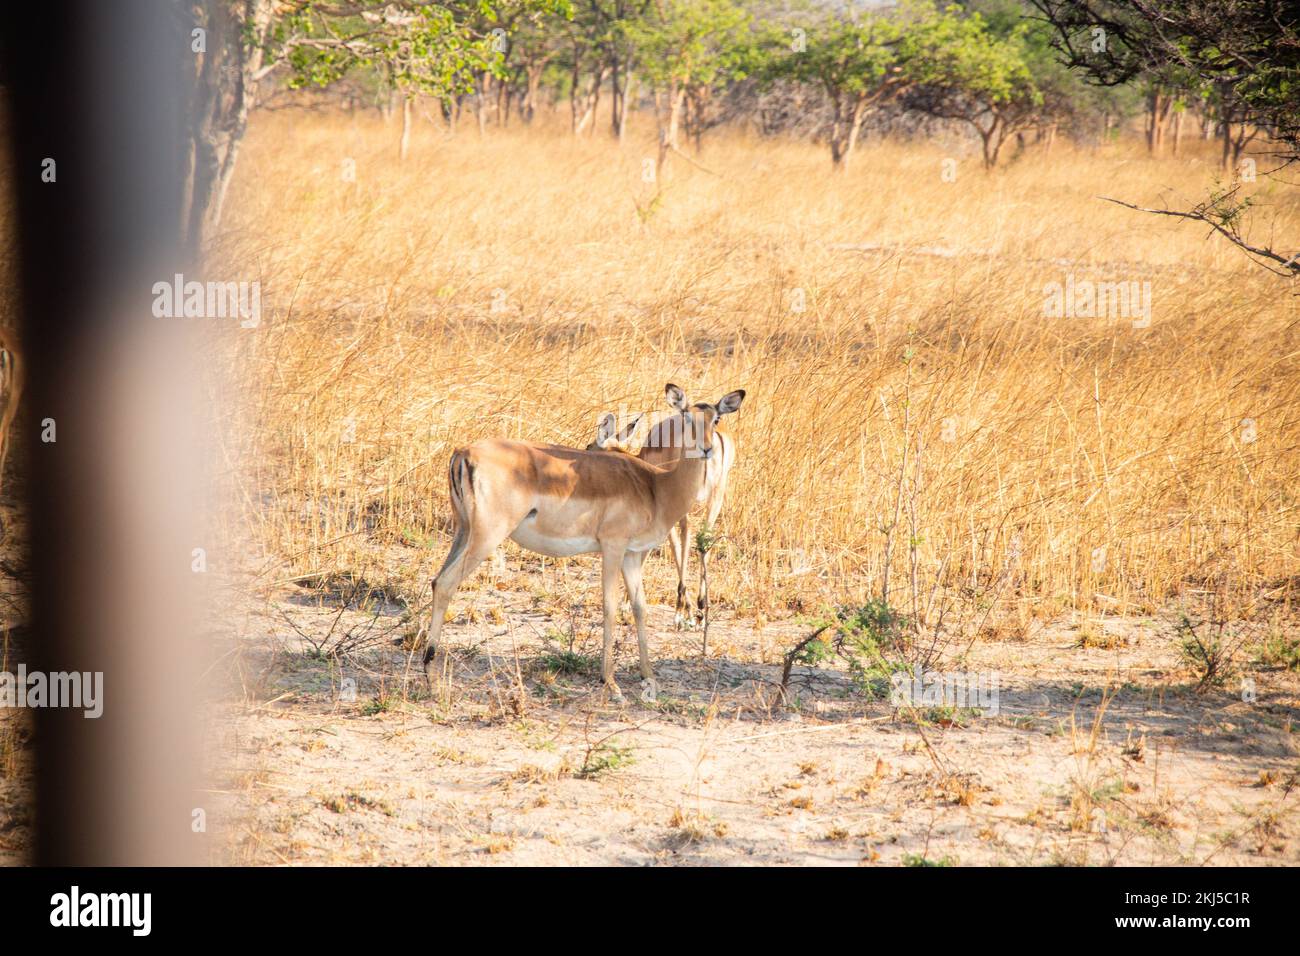 African Deer Wildlife of Zambia Africa in Chaminuka National Park Stock Photo